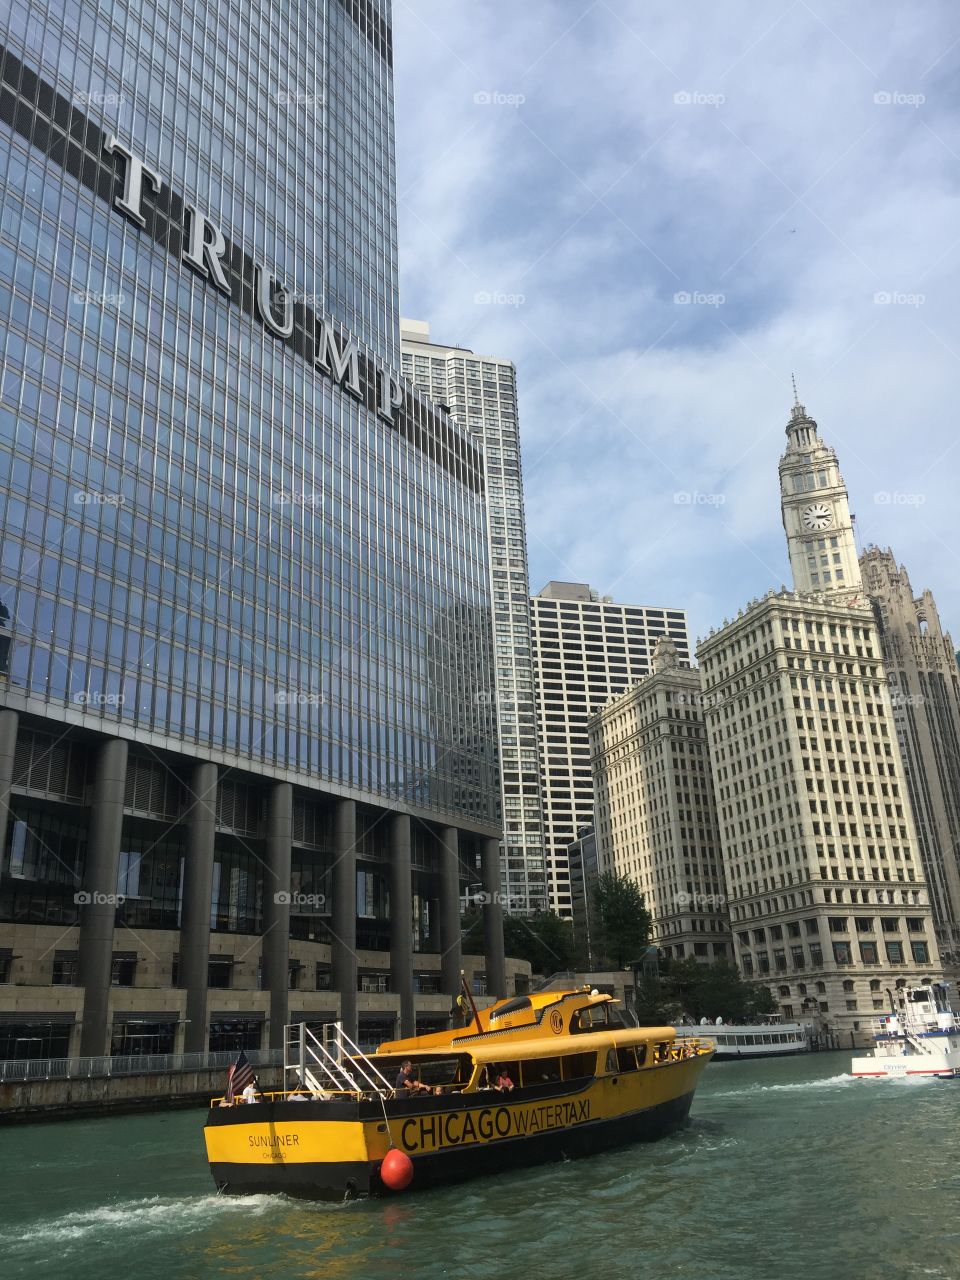 Chicago water way 